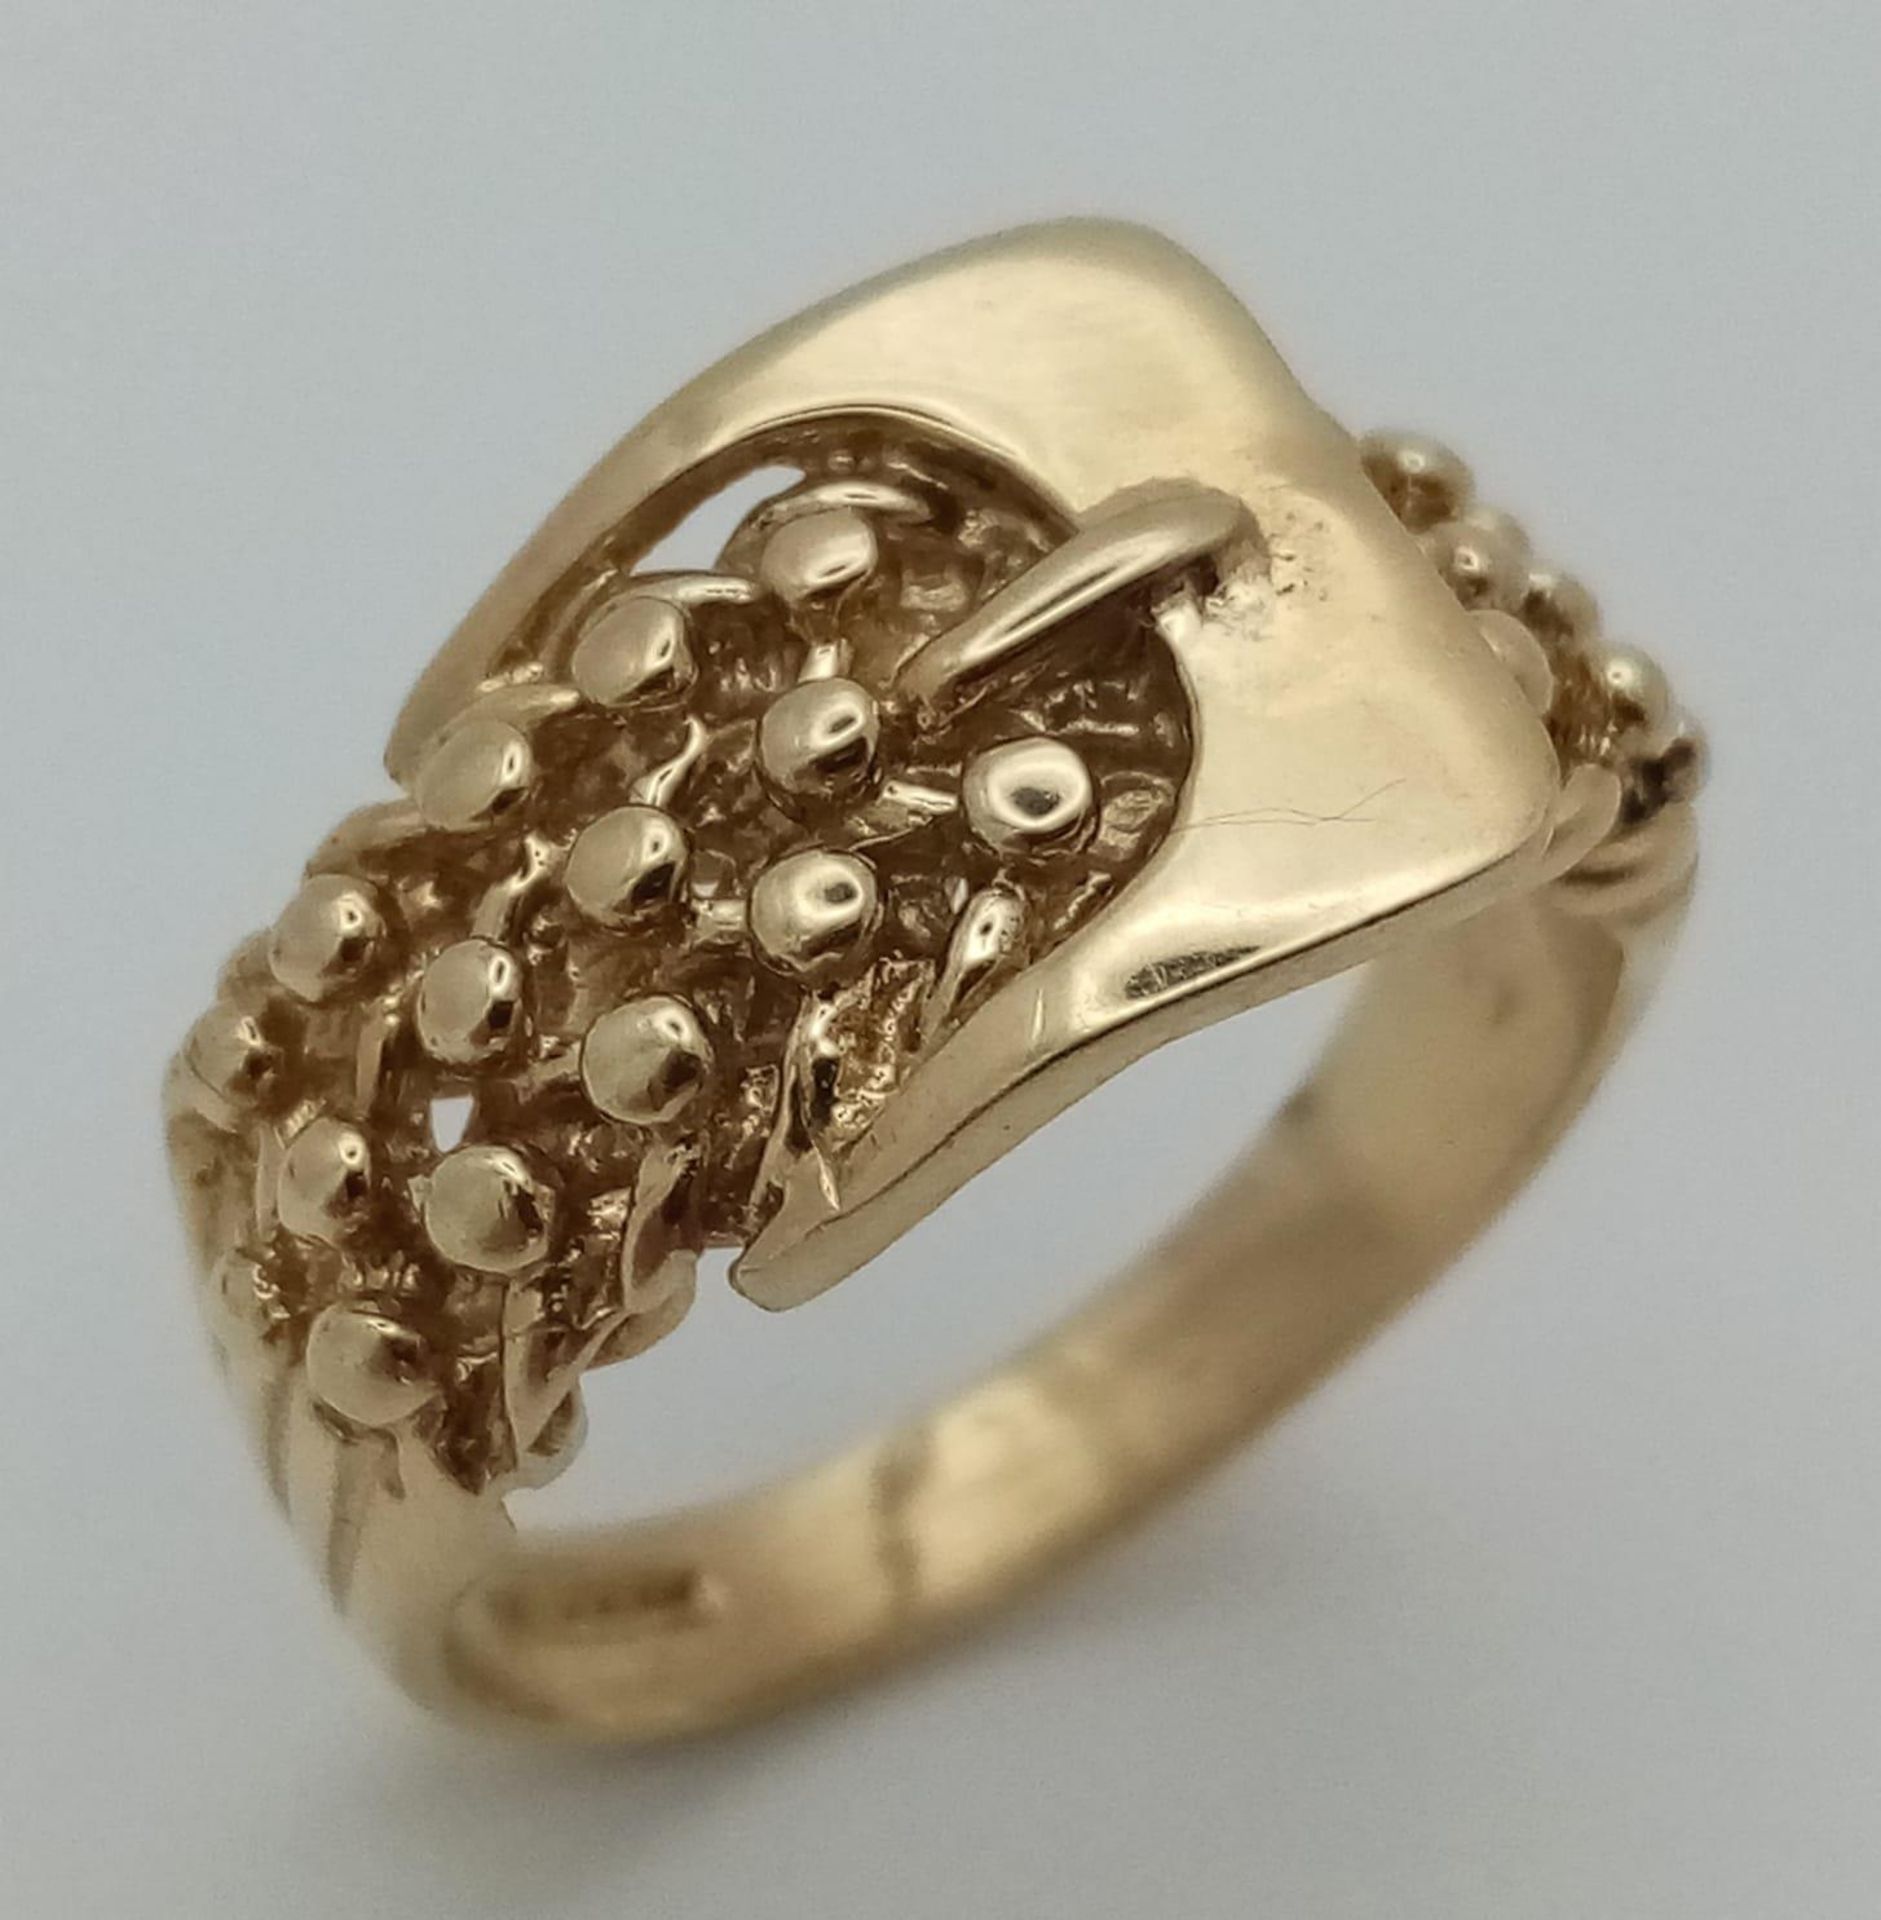 A 9K YELLOW GOLD BUCKLE KEEPER RING 7.6G SIZE U - Image 2 of 4